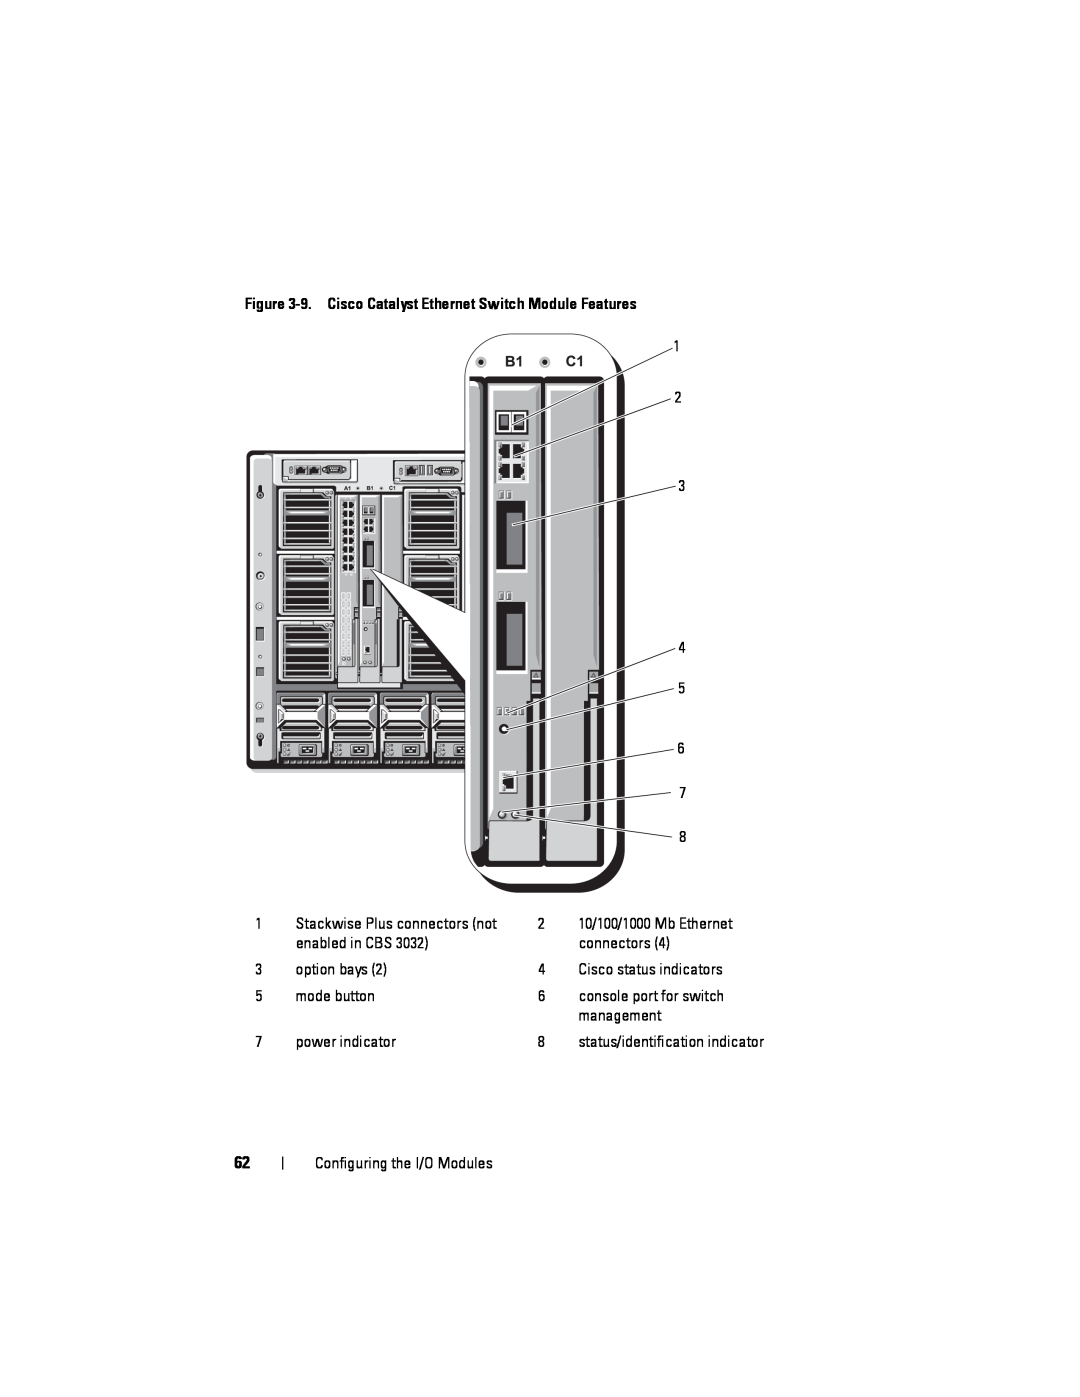 Dell M1000E manual 9. Cisco Catalyst Ethernet Switch Module Features, Stackwise Plus connectors not 